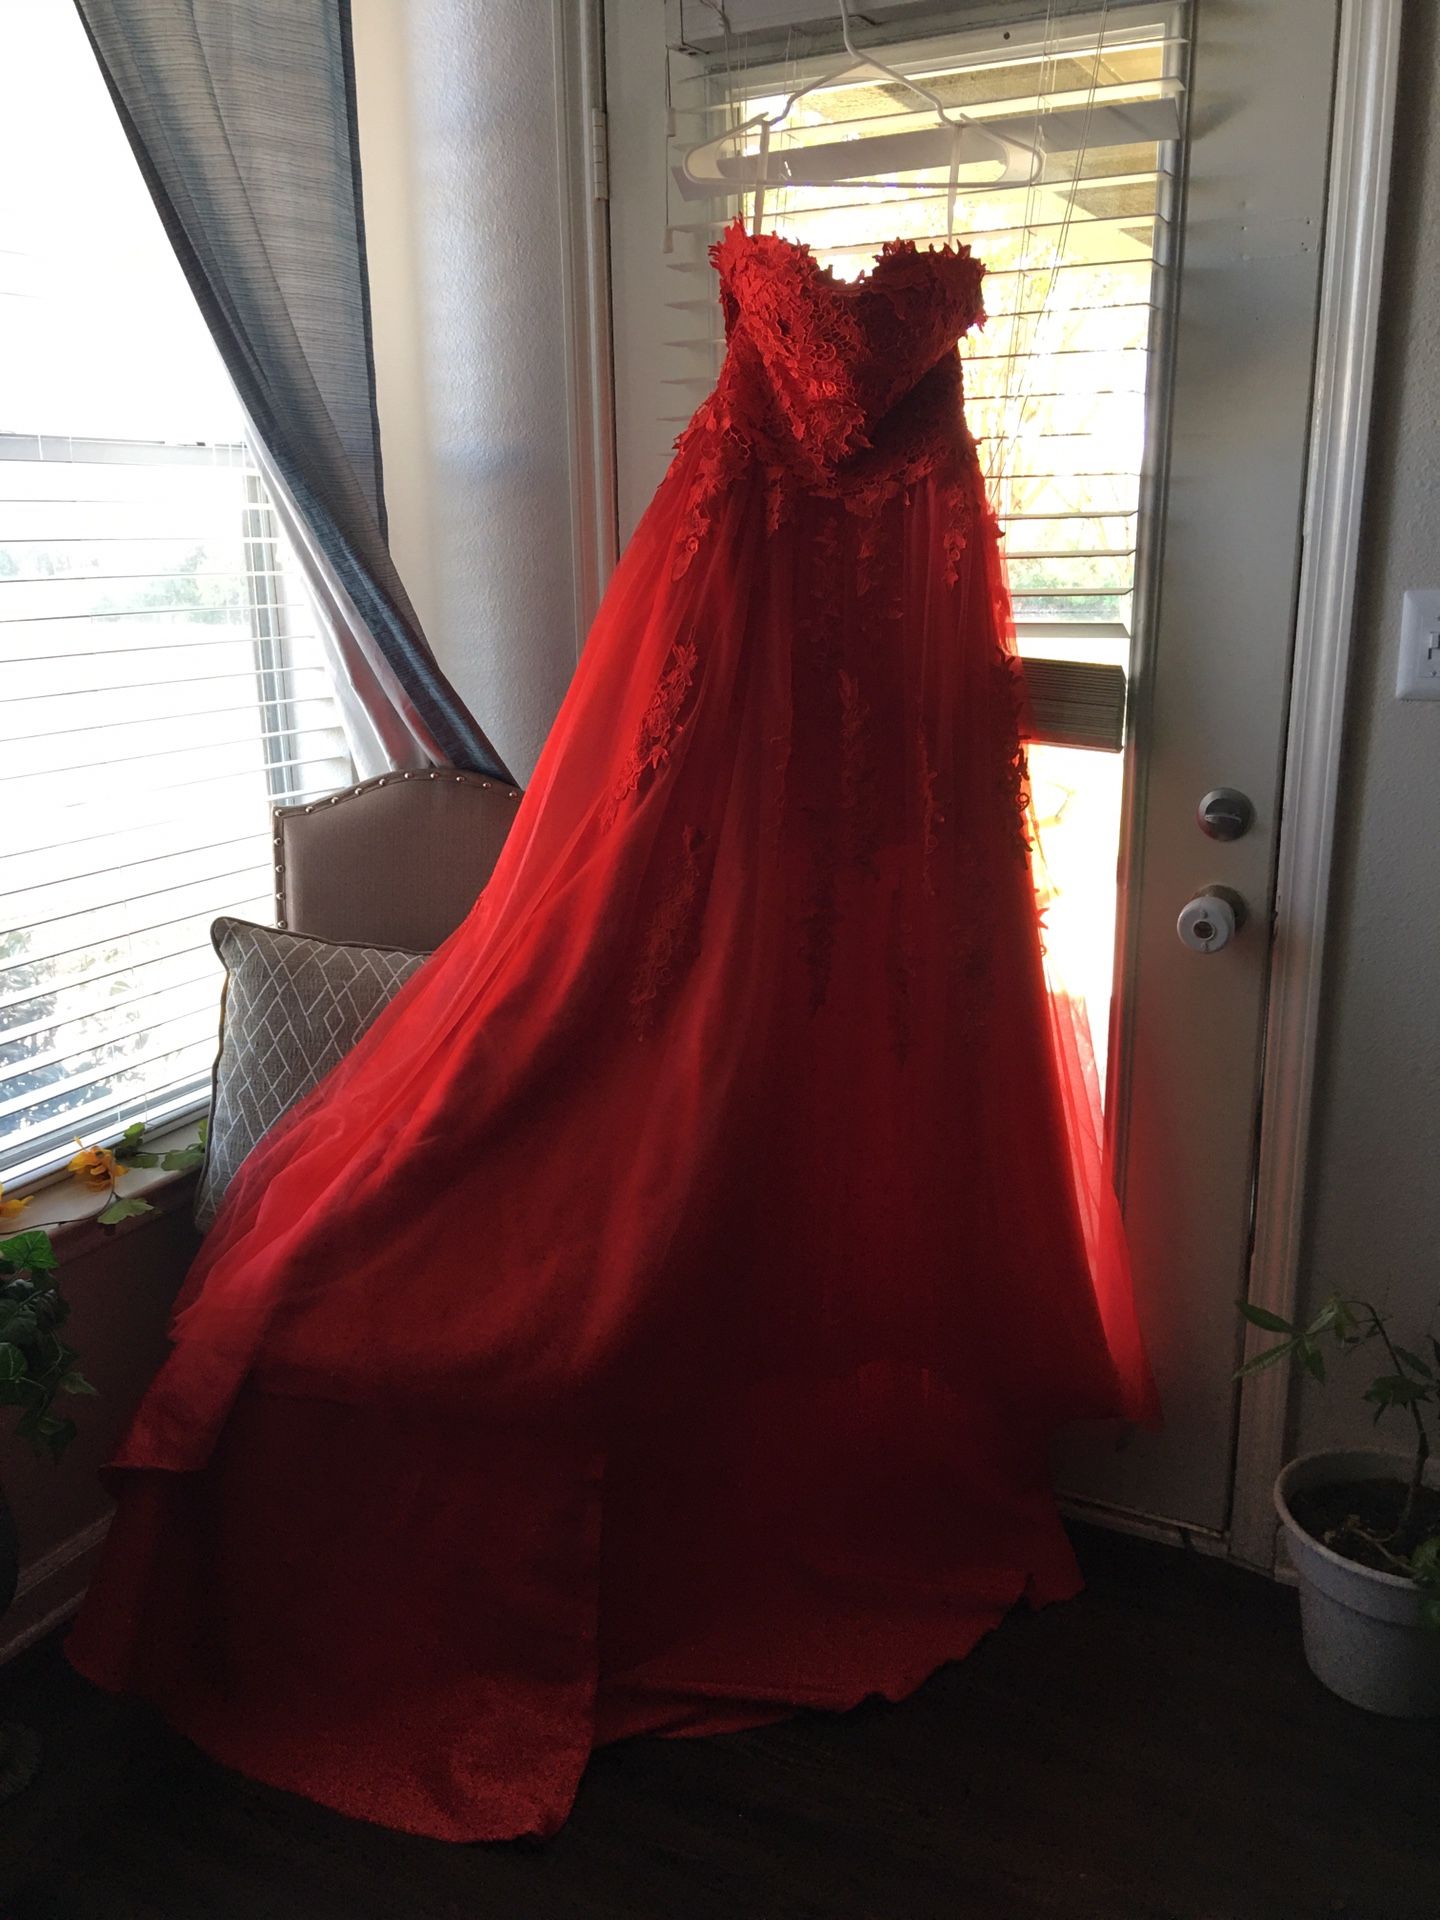 Red ball gown dress